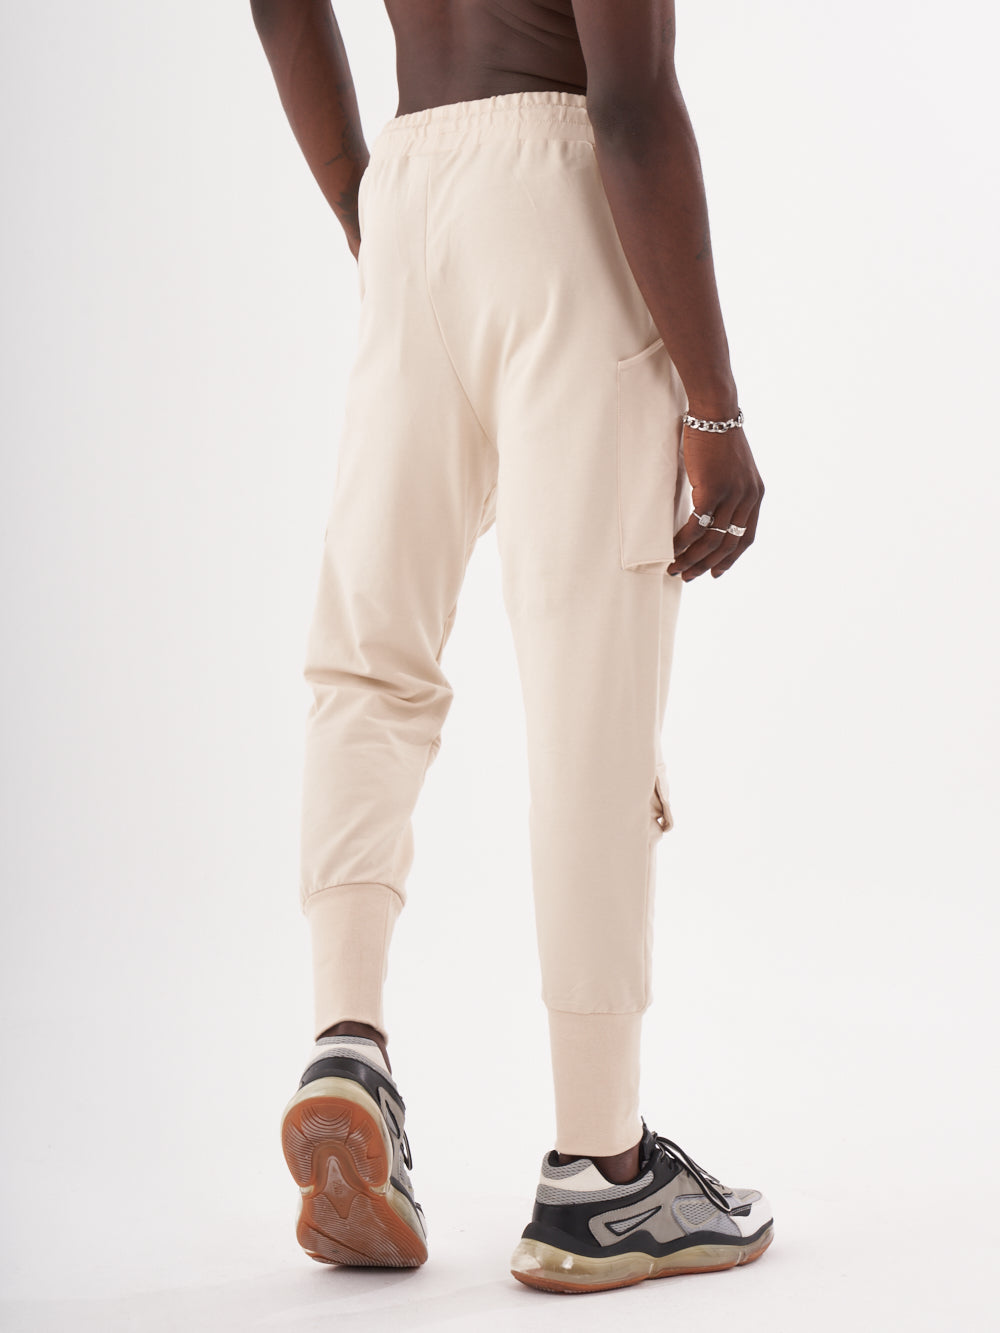 The back view of a man in GUERRILLA | BEIGE sweatpants.